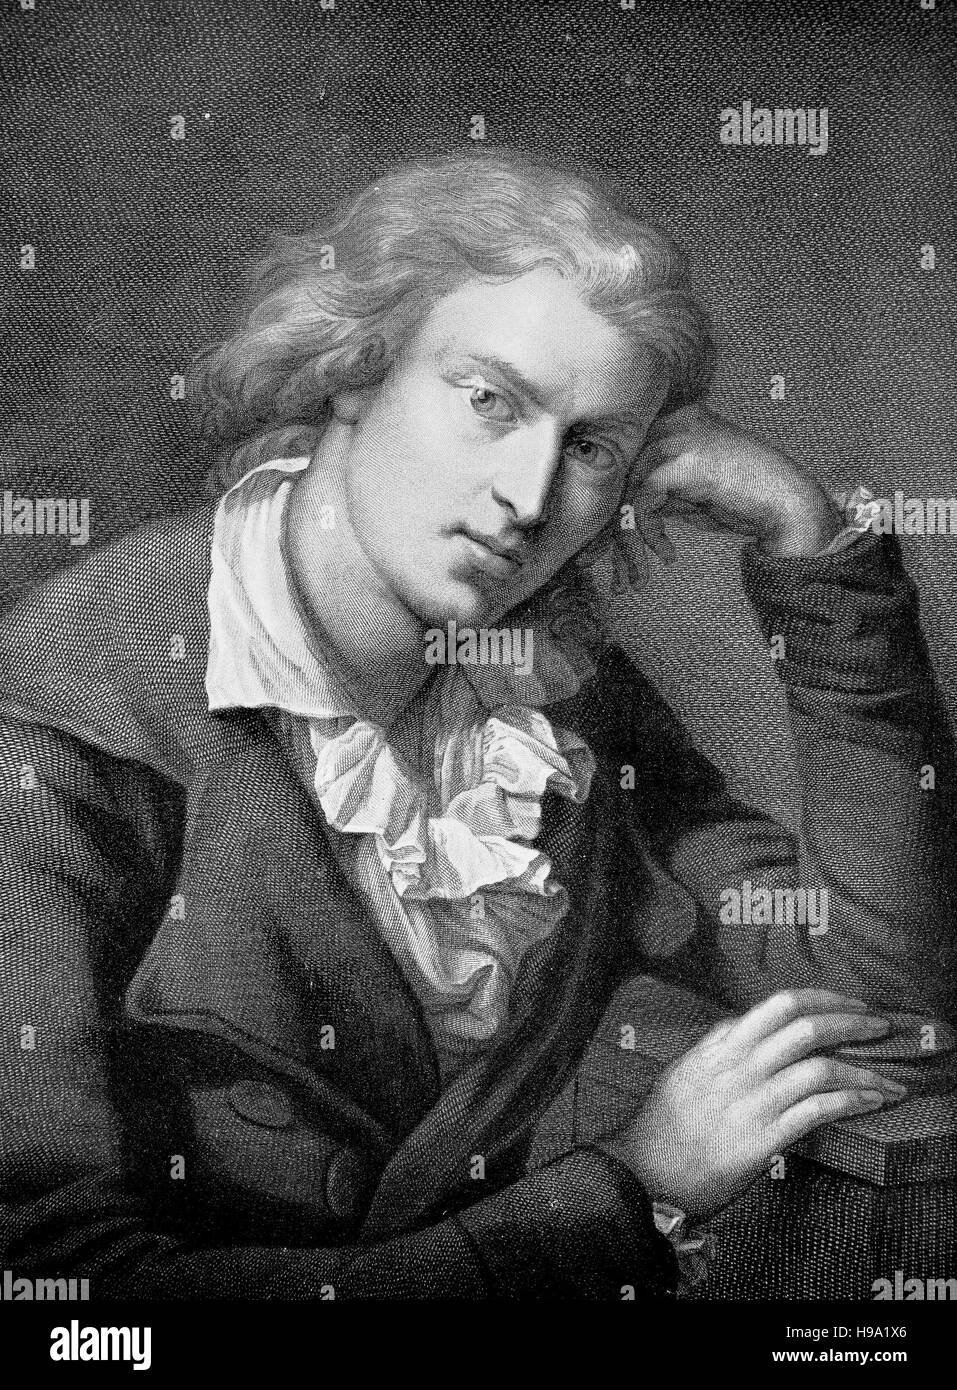 Johann Christoph Friedrich von Schiller, 10 November 1759 - 9 May 1805, was a German poet, philosopher, physician, historian, and playwright, historical illustration Stock Photo